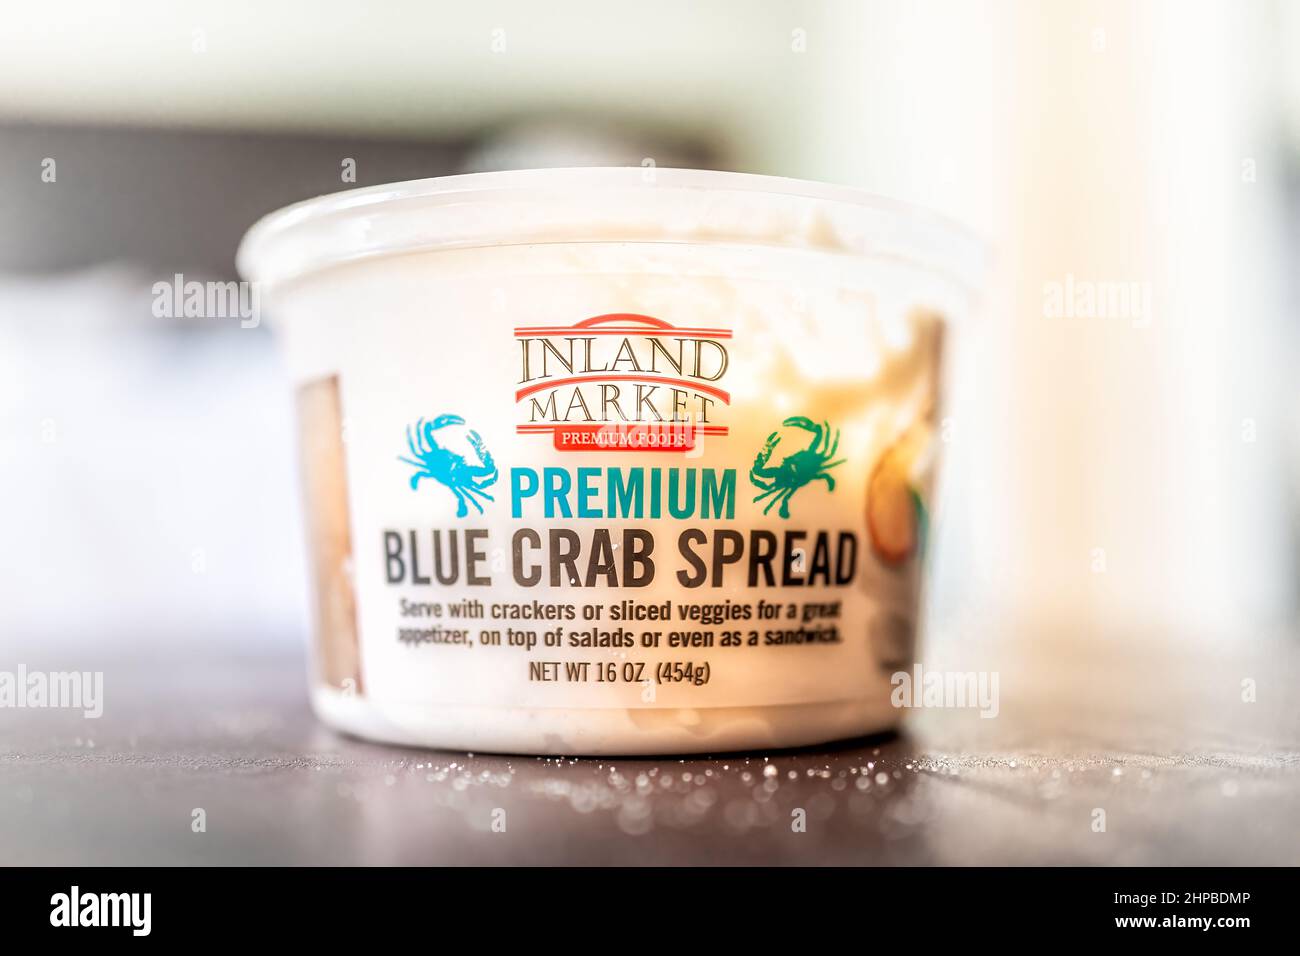 Naples, USA - August 5, 2021: Closeup of sign label and product for Inland Market Premium Blue Crab Spread storebought at Costco Stock Photo